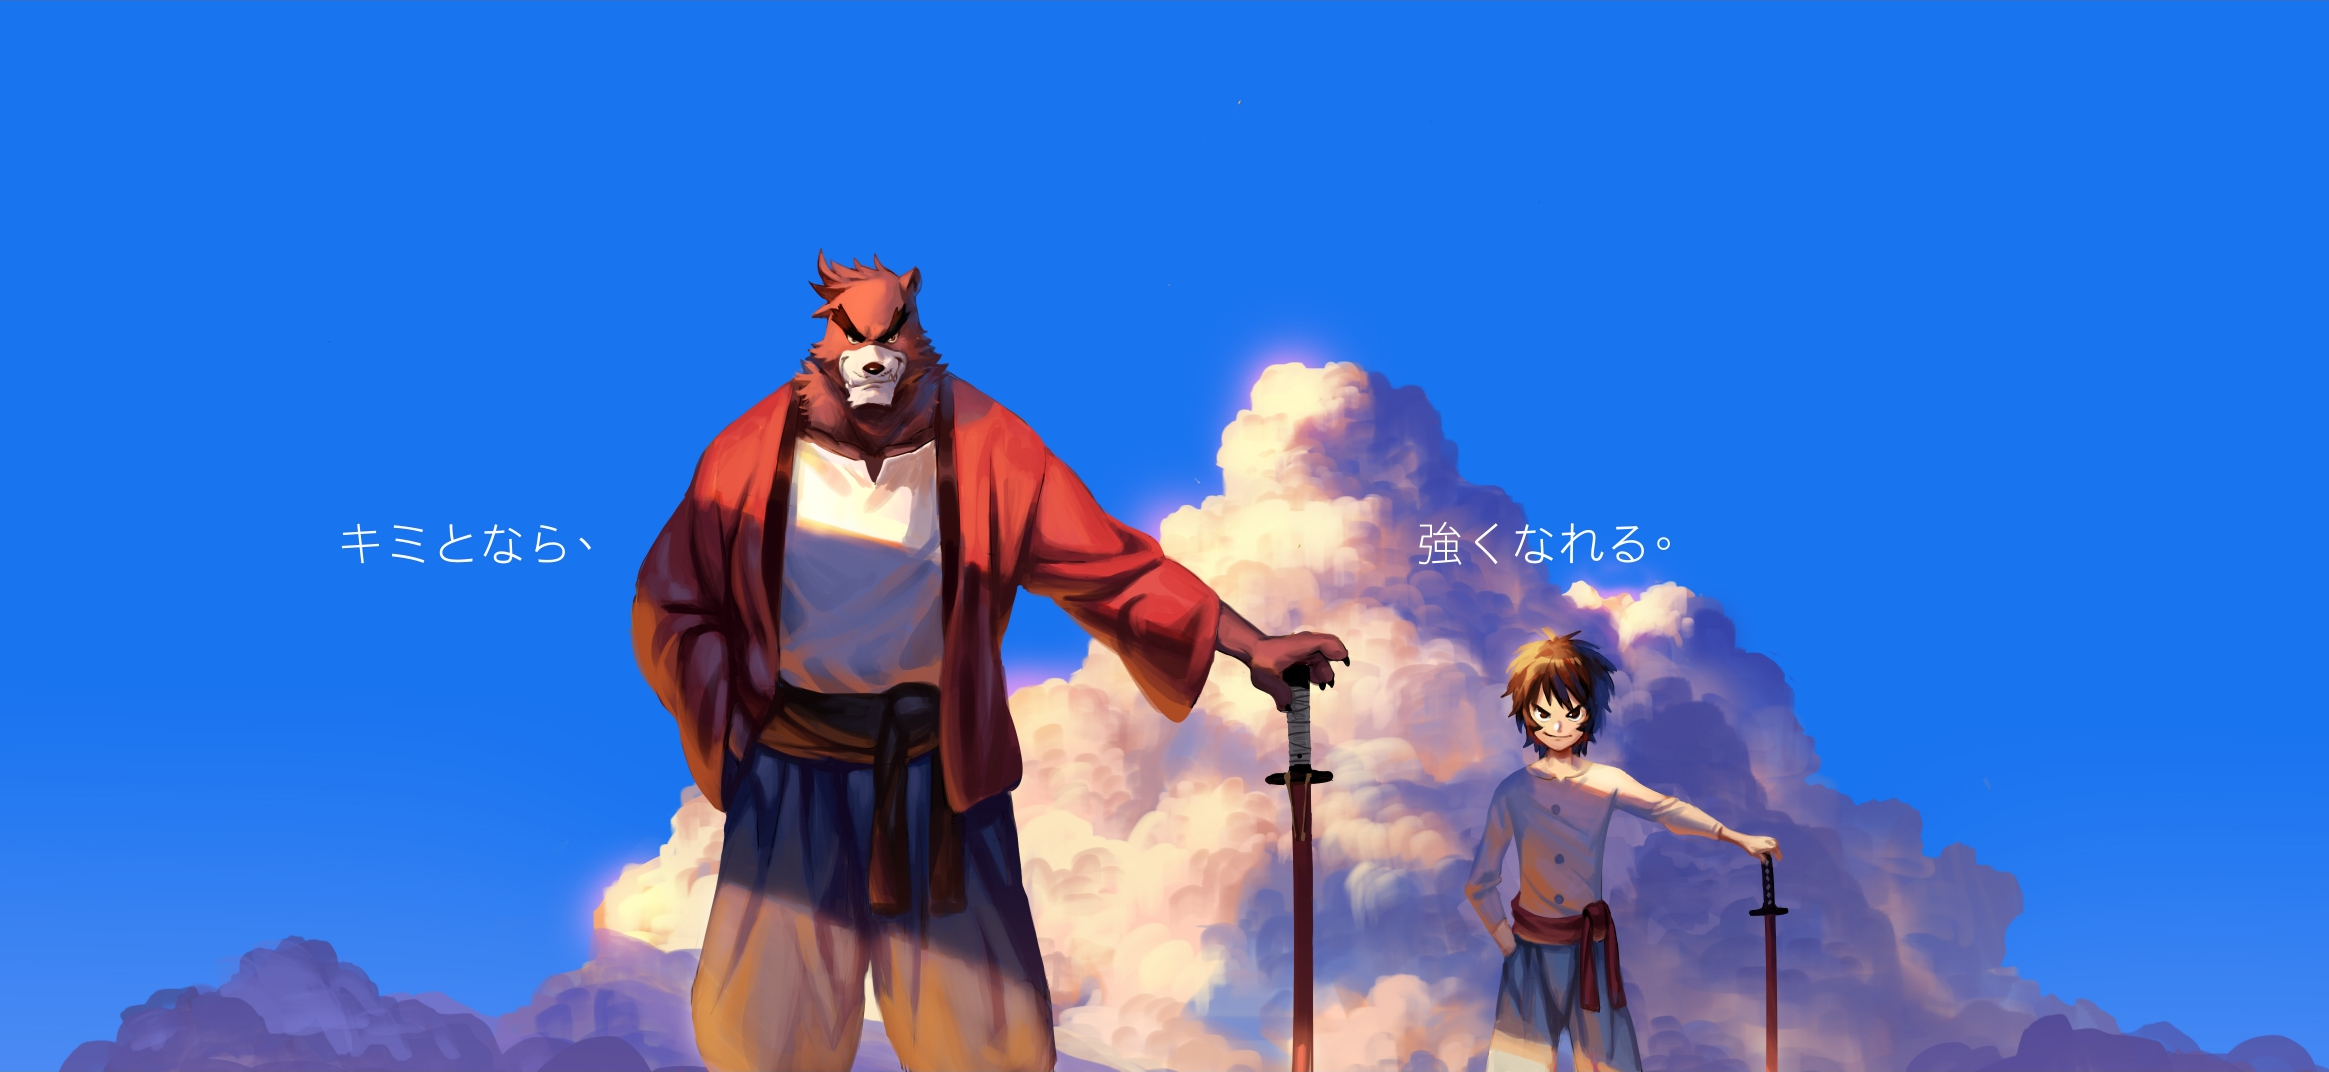 The Boy and the Beast Wallpaper and Background Image 2329x1072